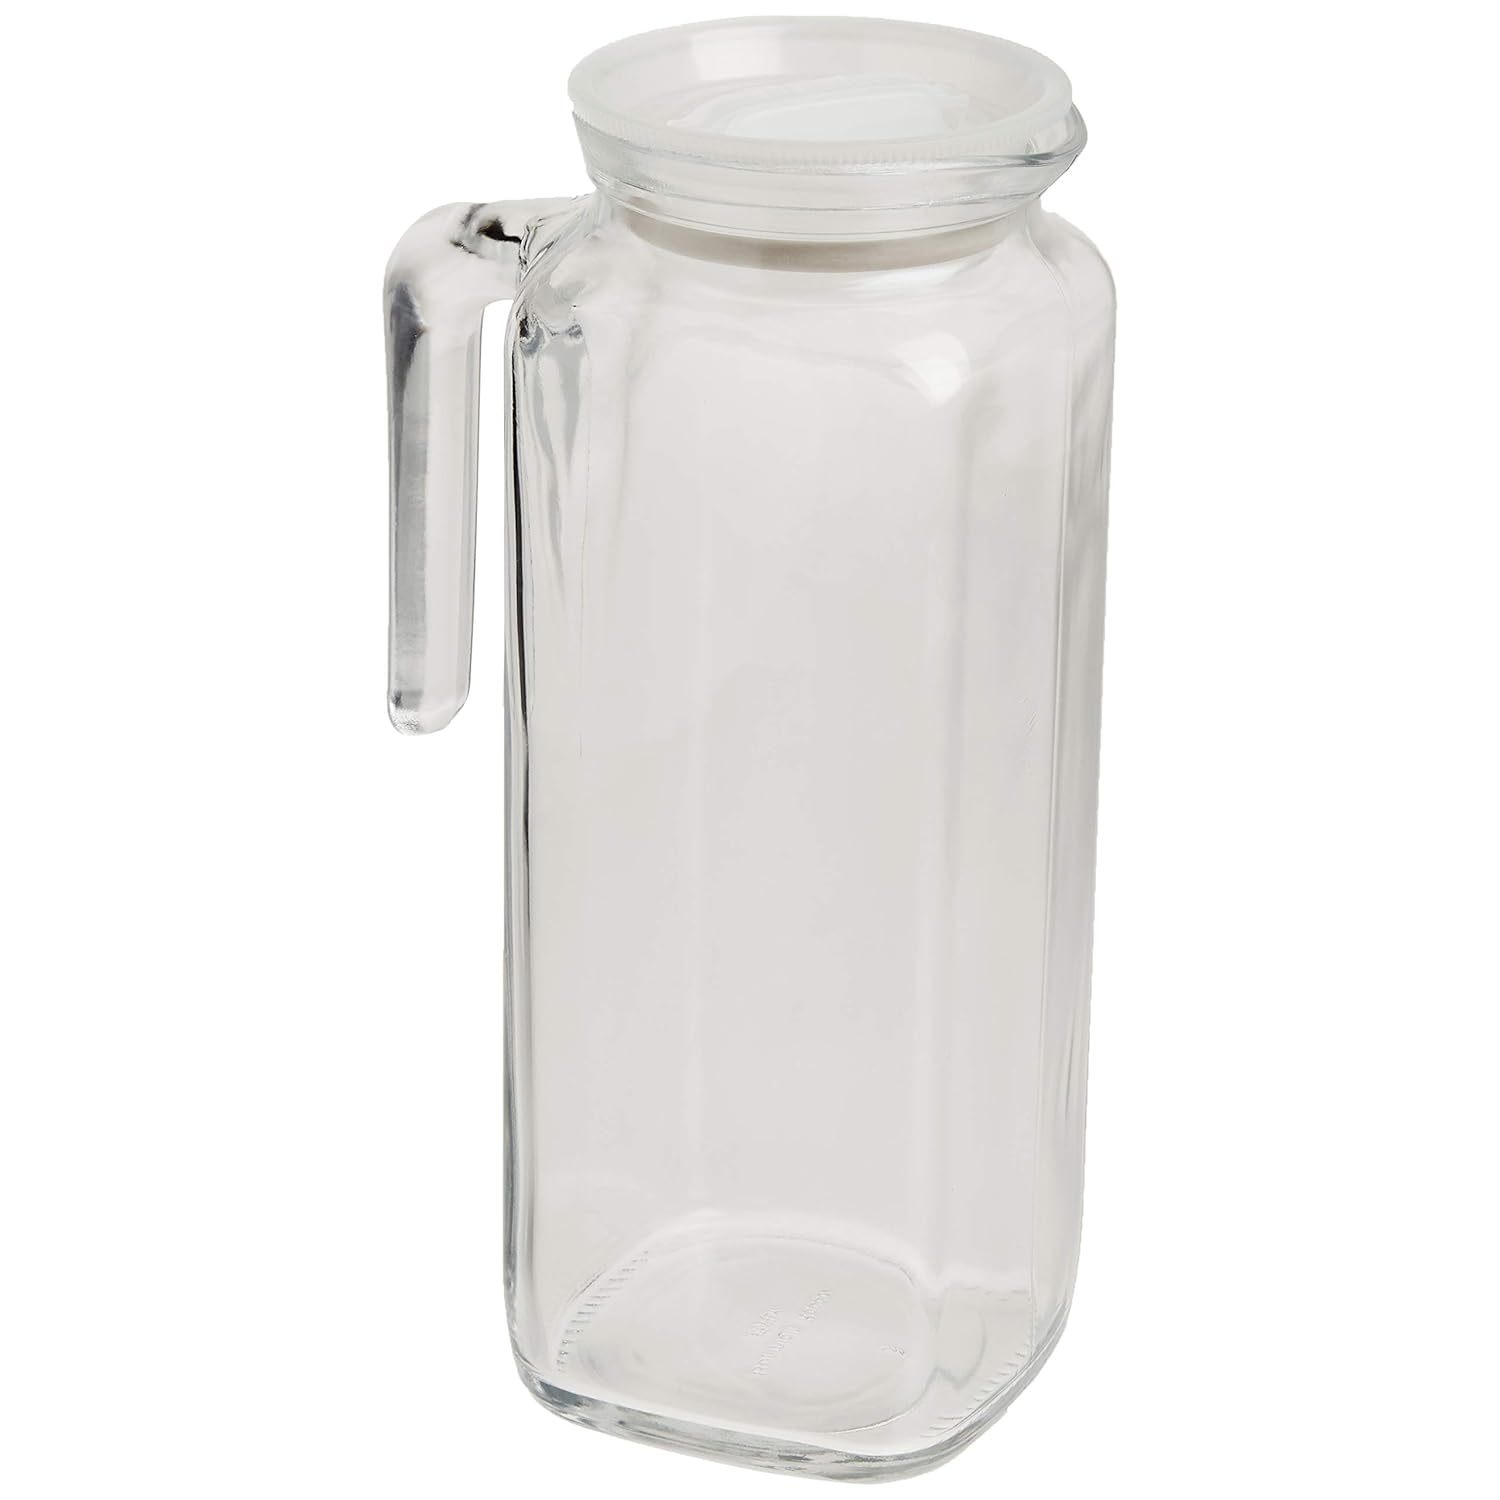 Bormioli Rocco Glass Frigoverre Jug with Airtight Lid 33.75oz, Set of 1, Frosted - $40.84